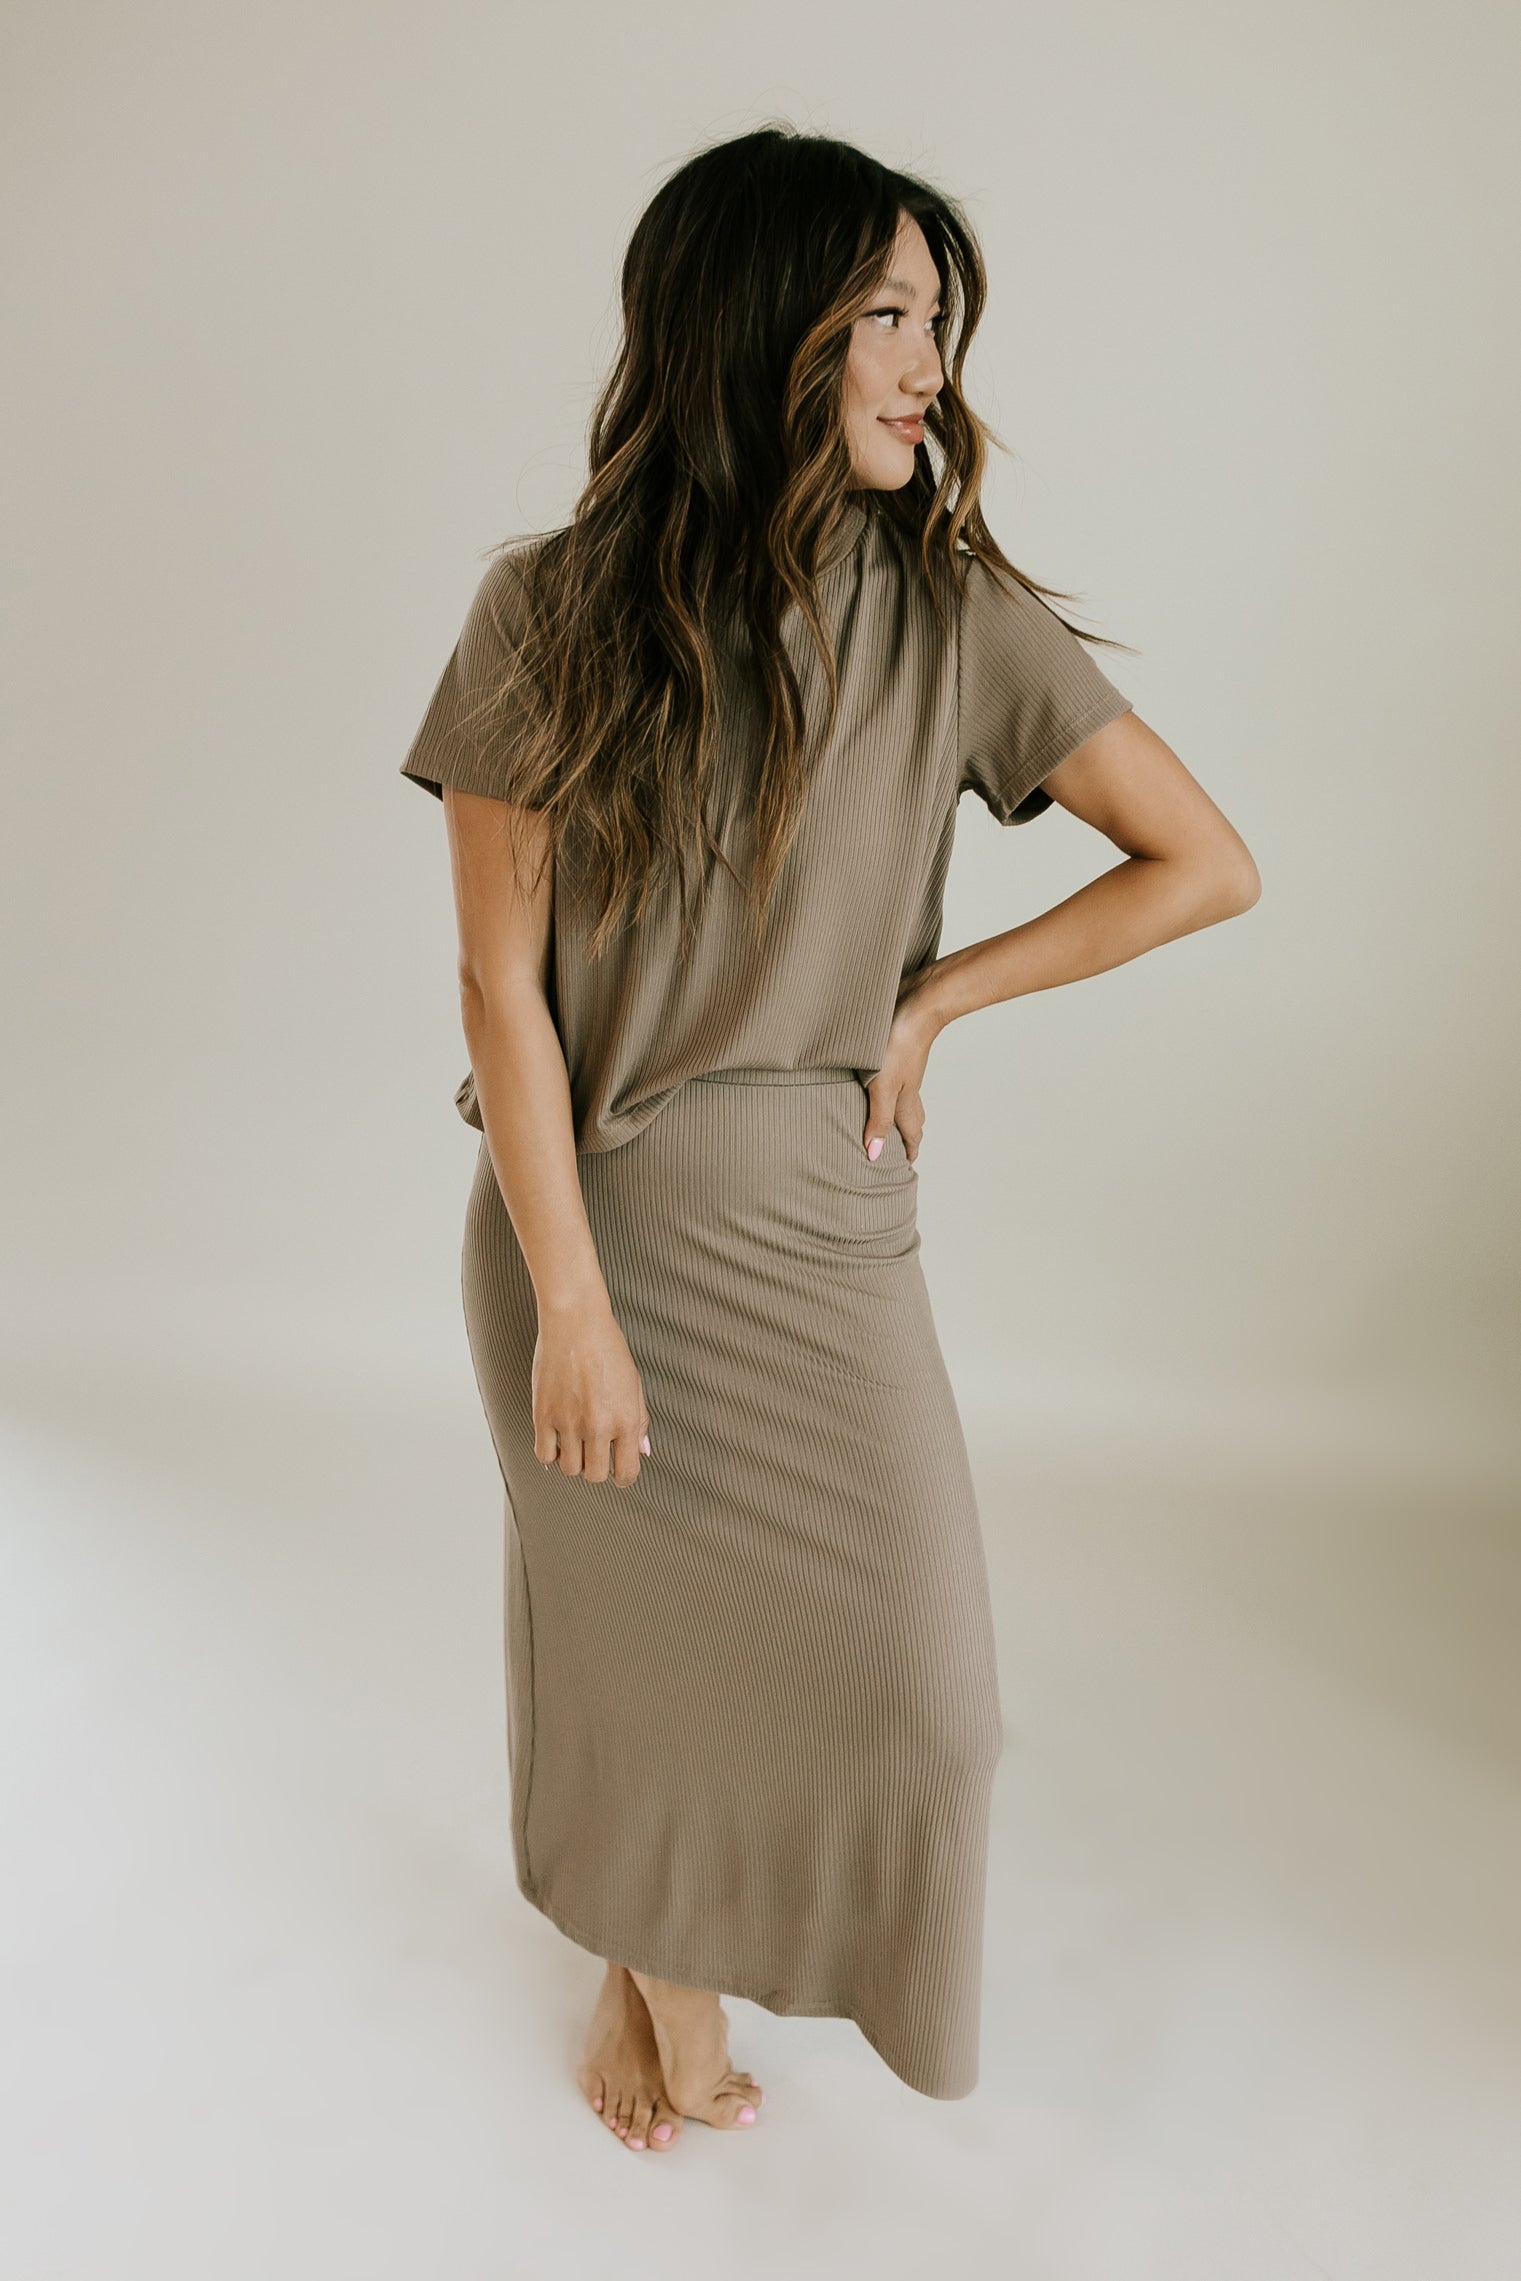 Temecula Ribbed Top + Midi Skirt Set - Taupe — THELIFESTYLEDCO Shop